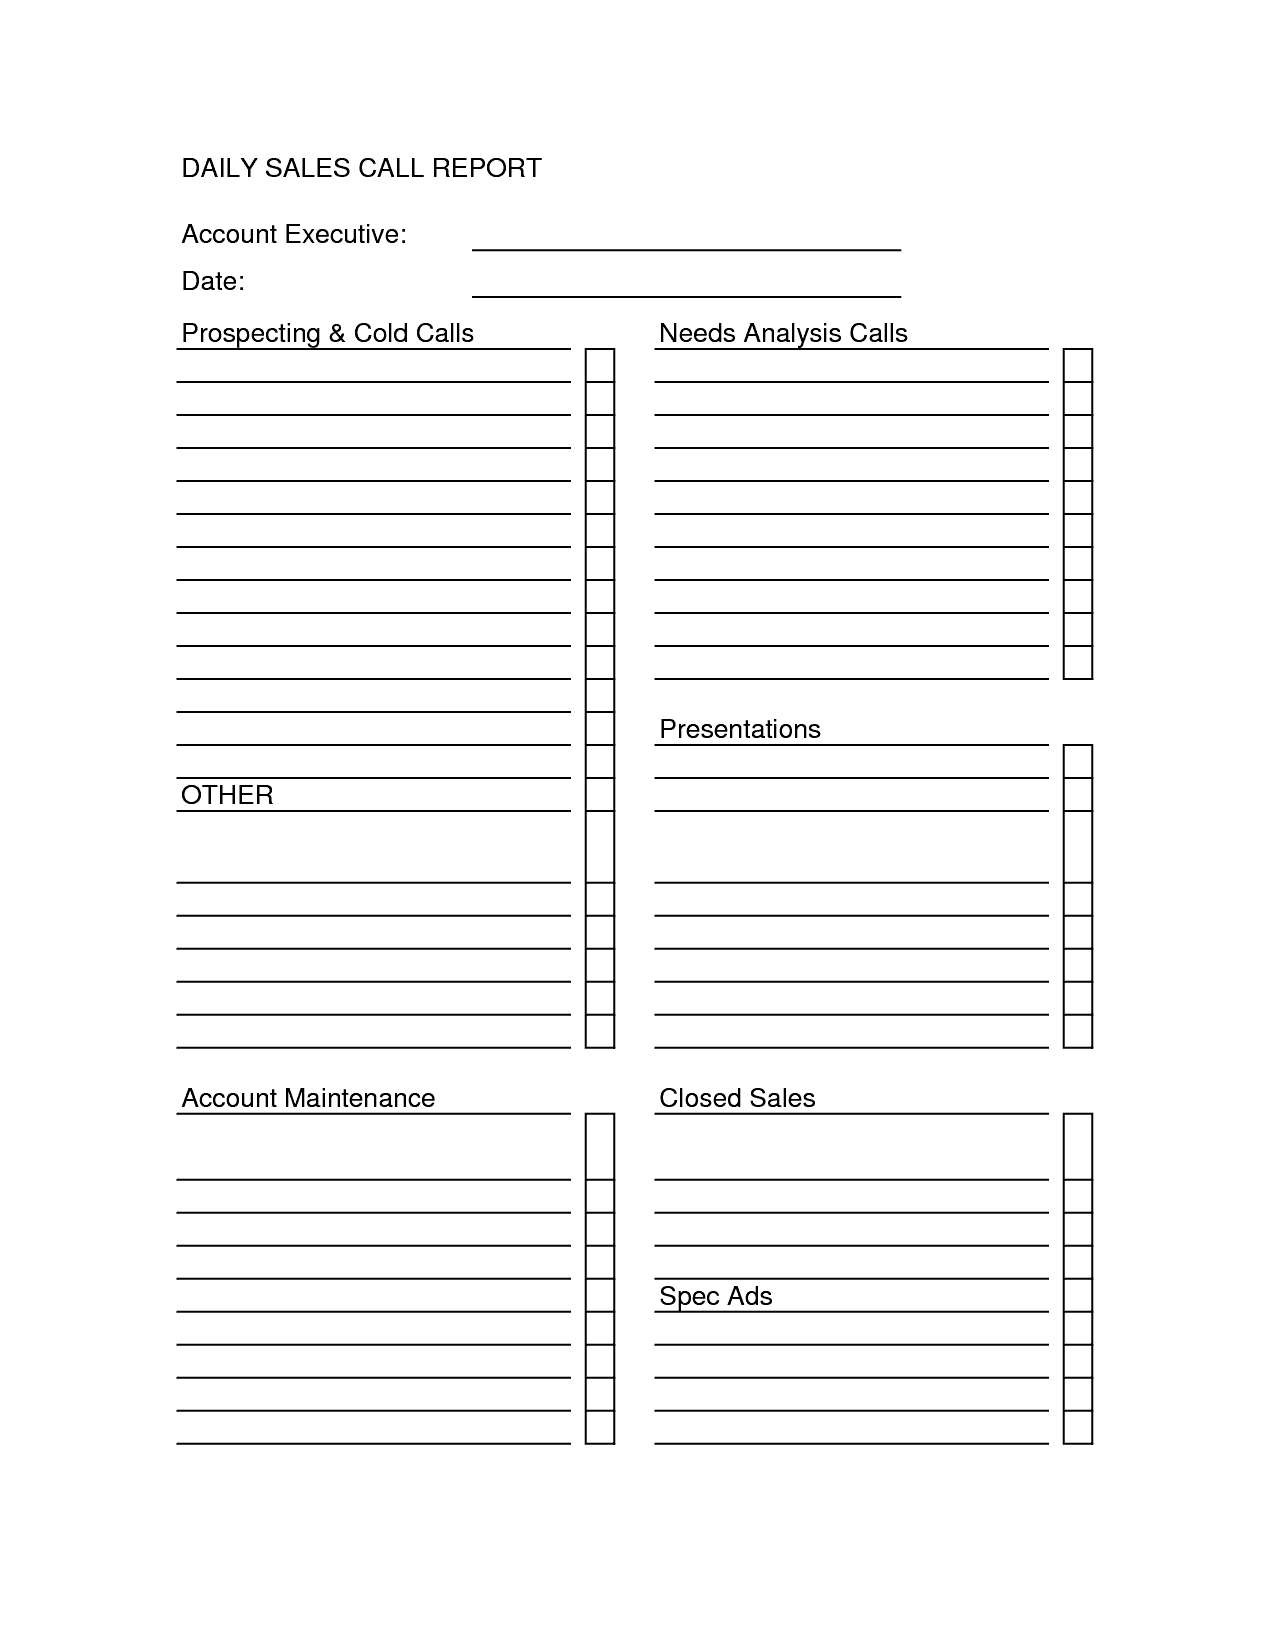 Sales Call Report Templates - Word Excel Fomats Within Sales Call Report Template Free